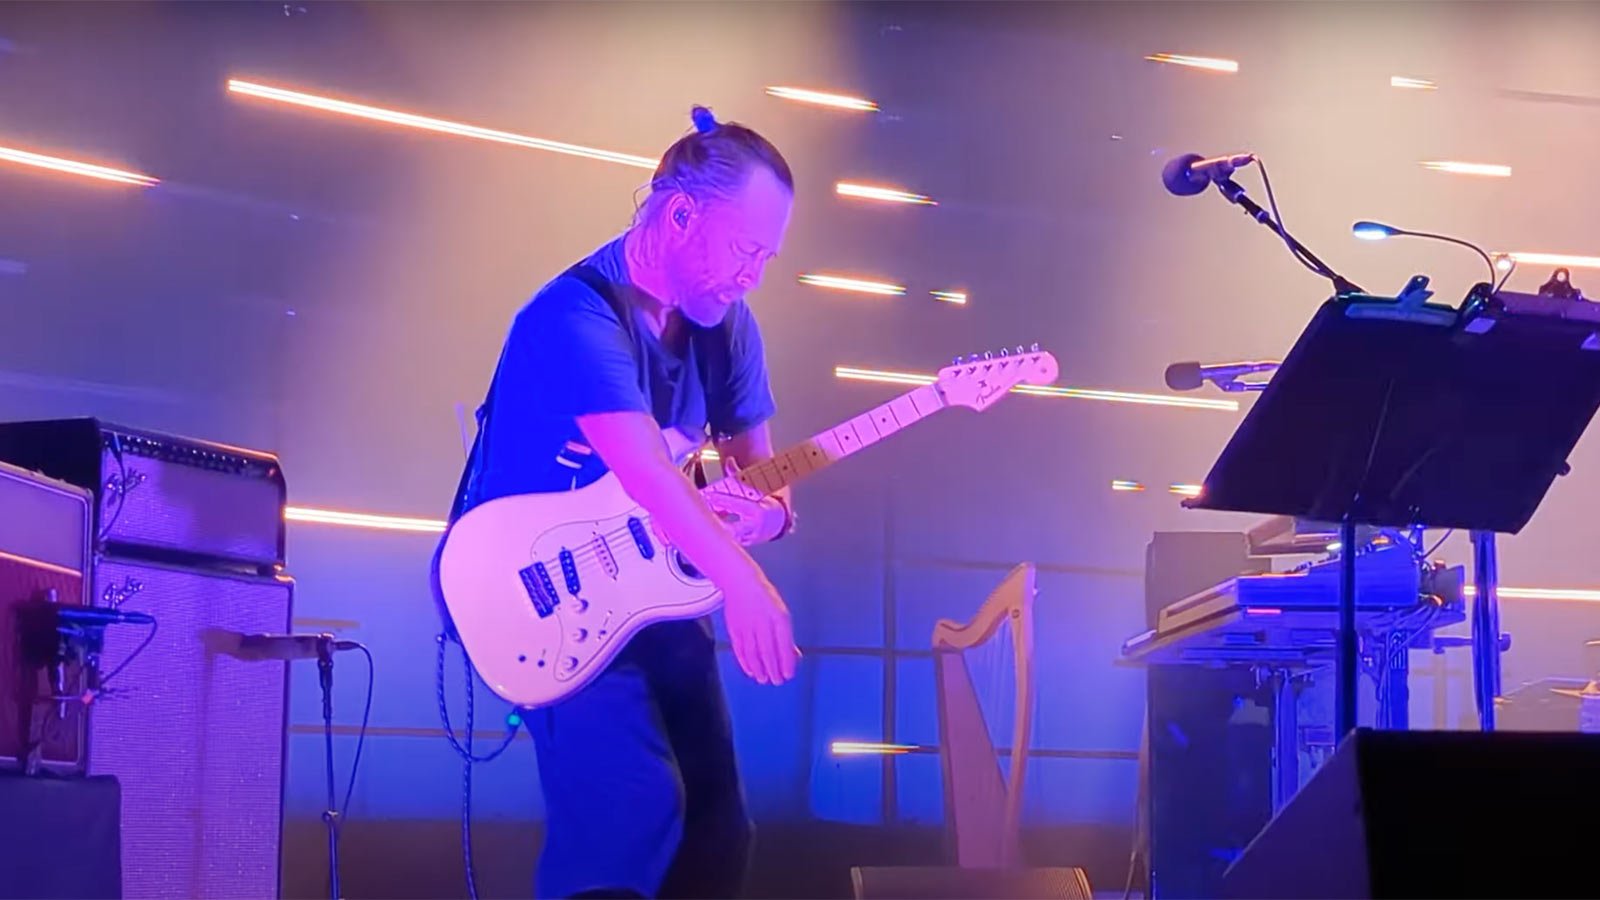 Behold Thom Yorke play Ed O’Brien’s signature Fender Strat on The Smile’s fresh observe, Bodies Laughing